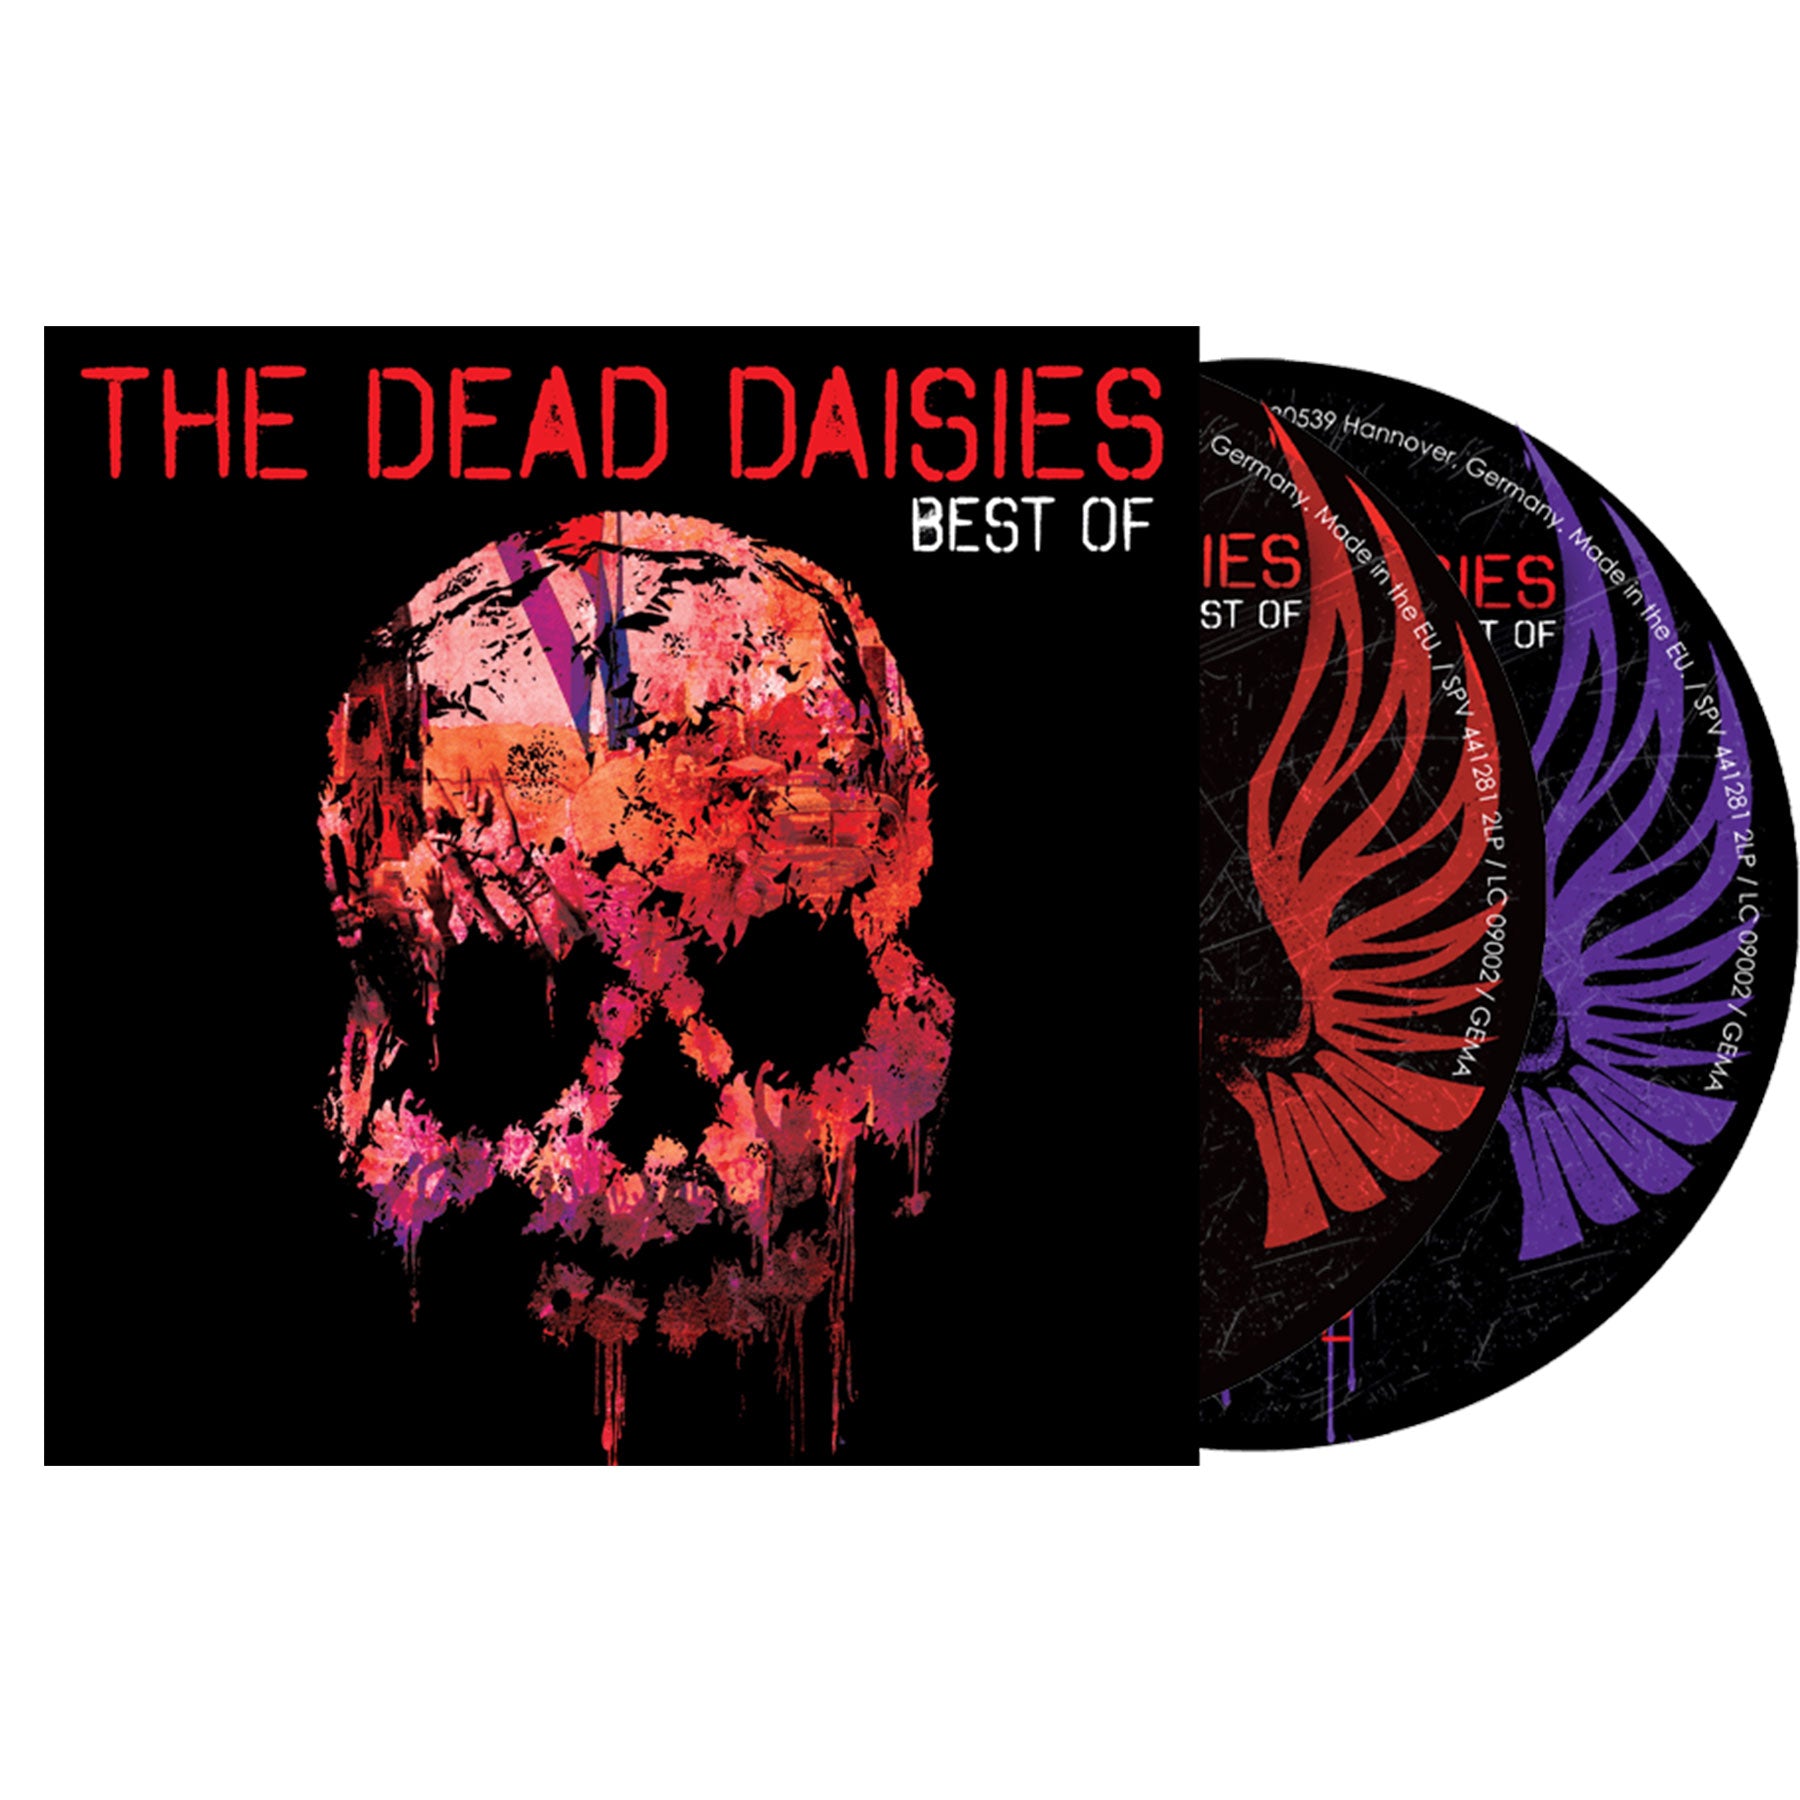 THE DEAD DAISIES Best Of CD